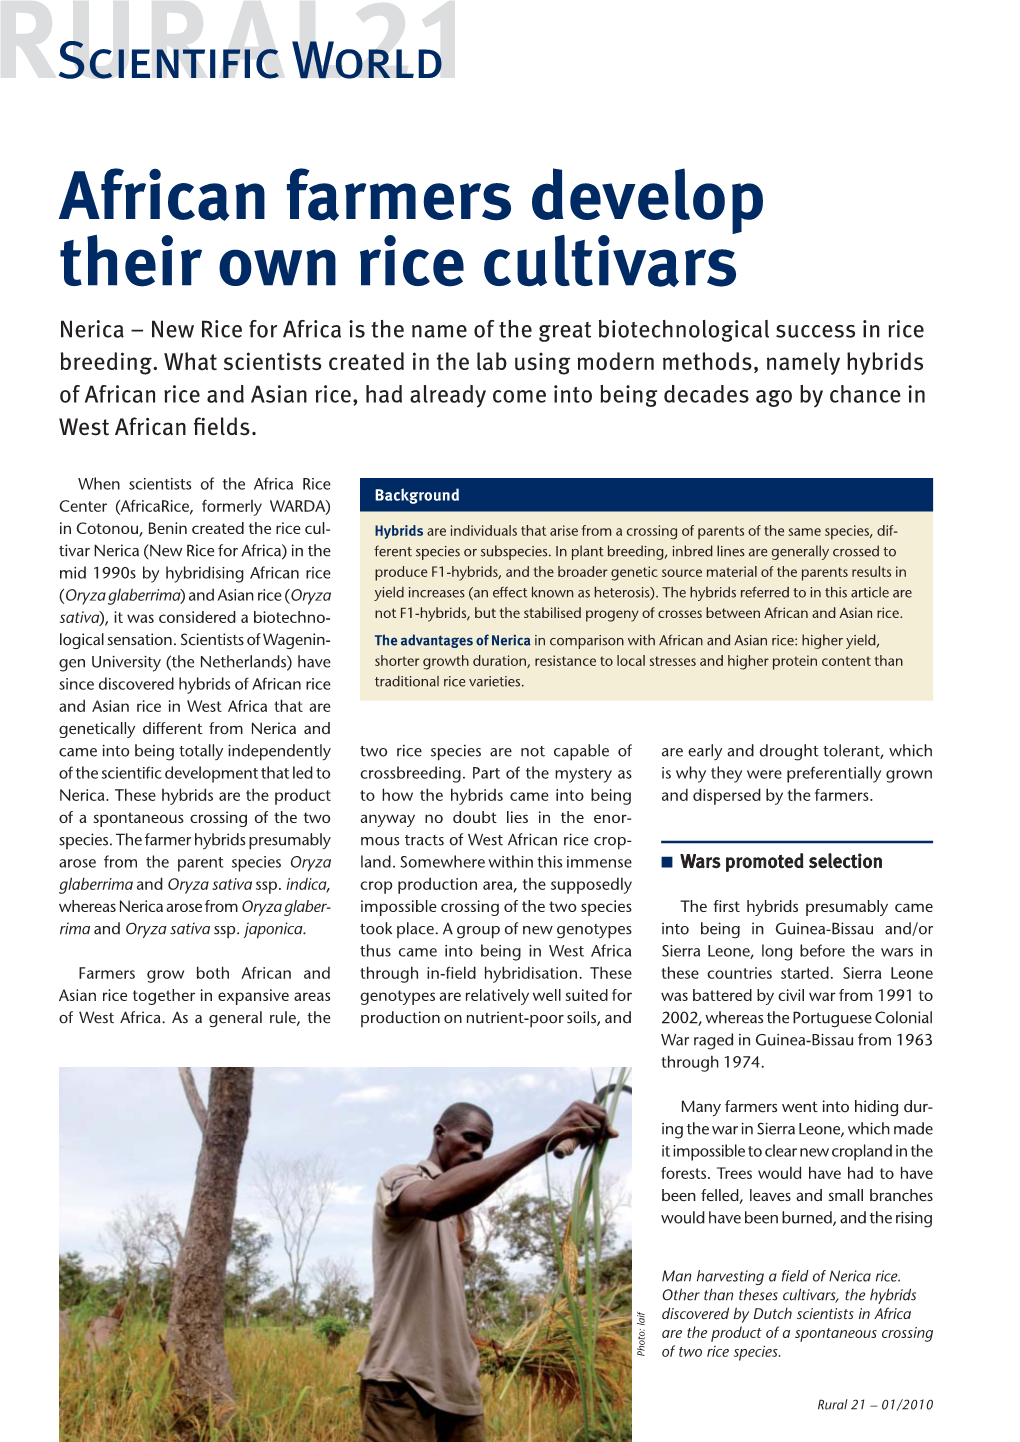 African Farmers Develop Their Own Rice Cultivars Nerica – New Rice for Africa Is the Name of the Great Biotechnological Success in Rice Breeding